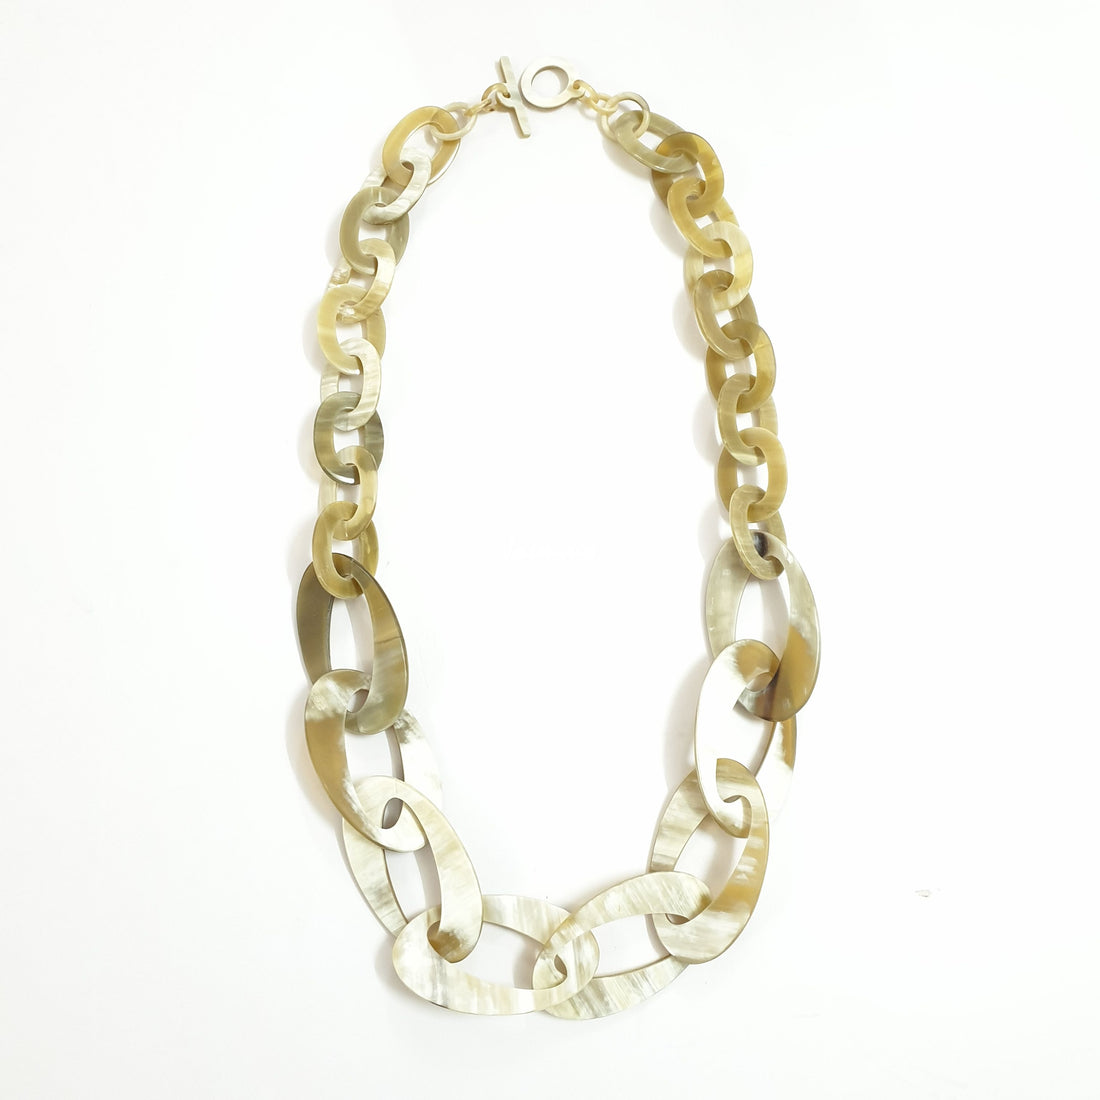 Jasmino unique handmade Vintage chain link necklace jewelry features beige in natural buffalo horn for women's gifts on Christmas